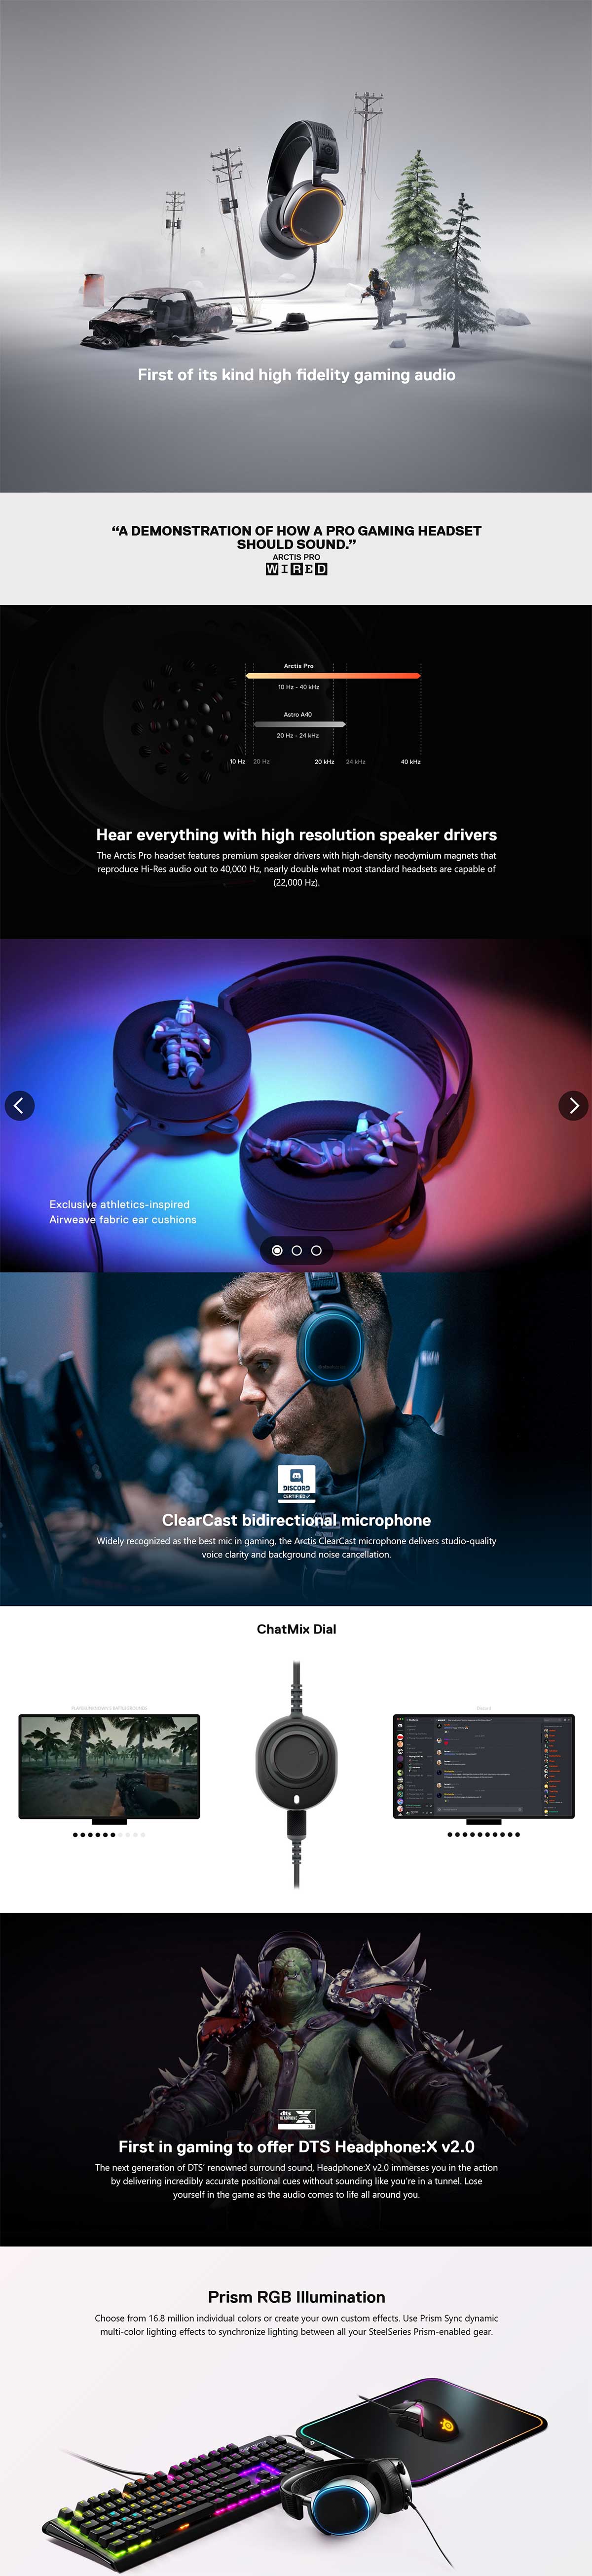 SteelSeries Arctis Pro Gaming Headset High Res Audio RGB 61486
Details